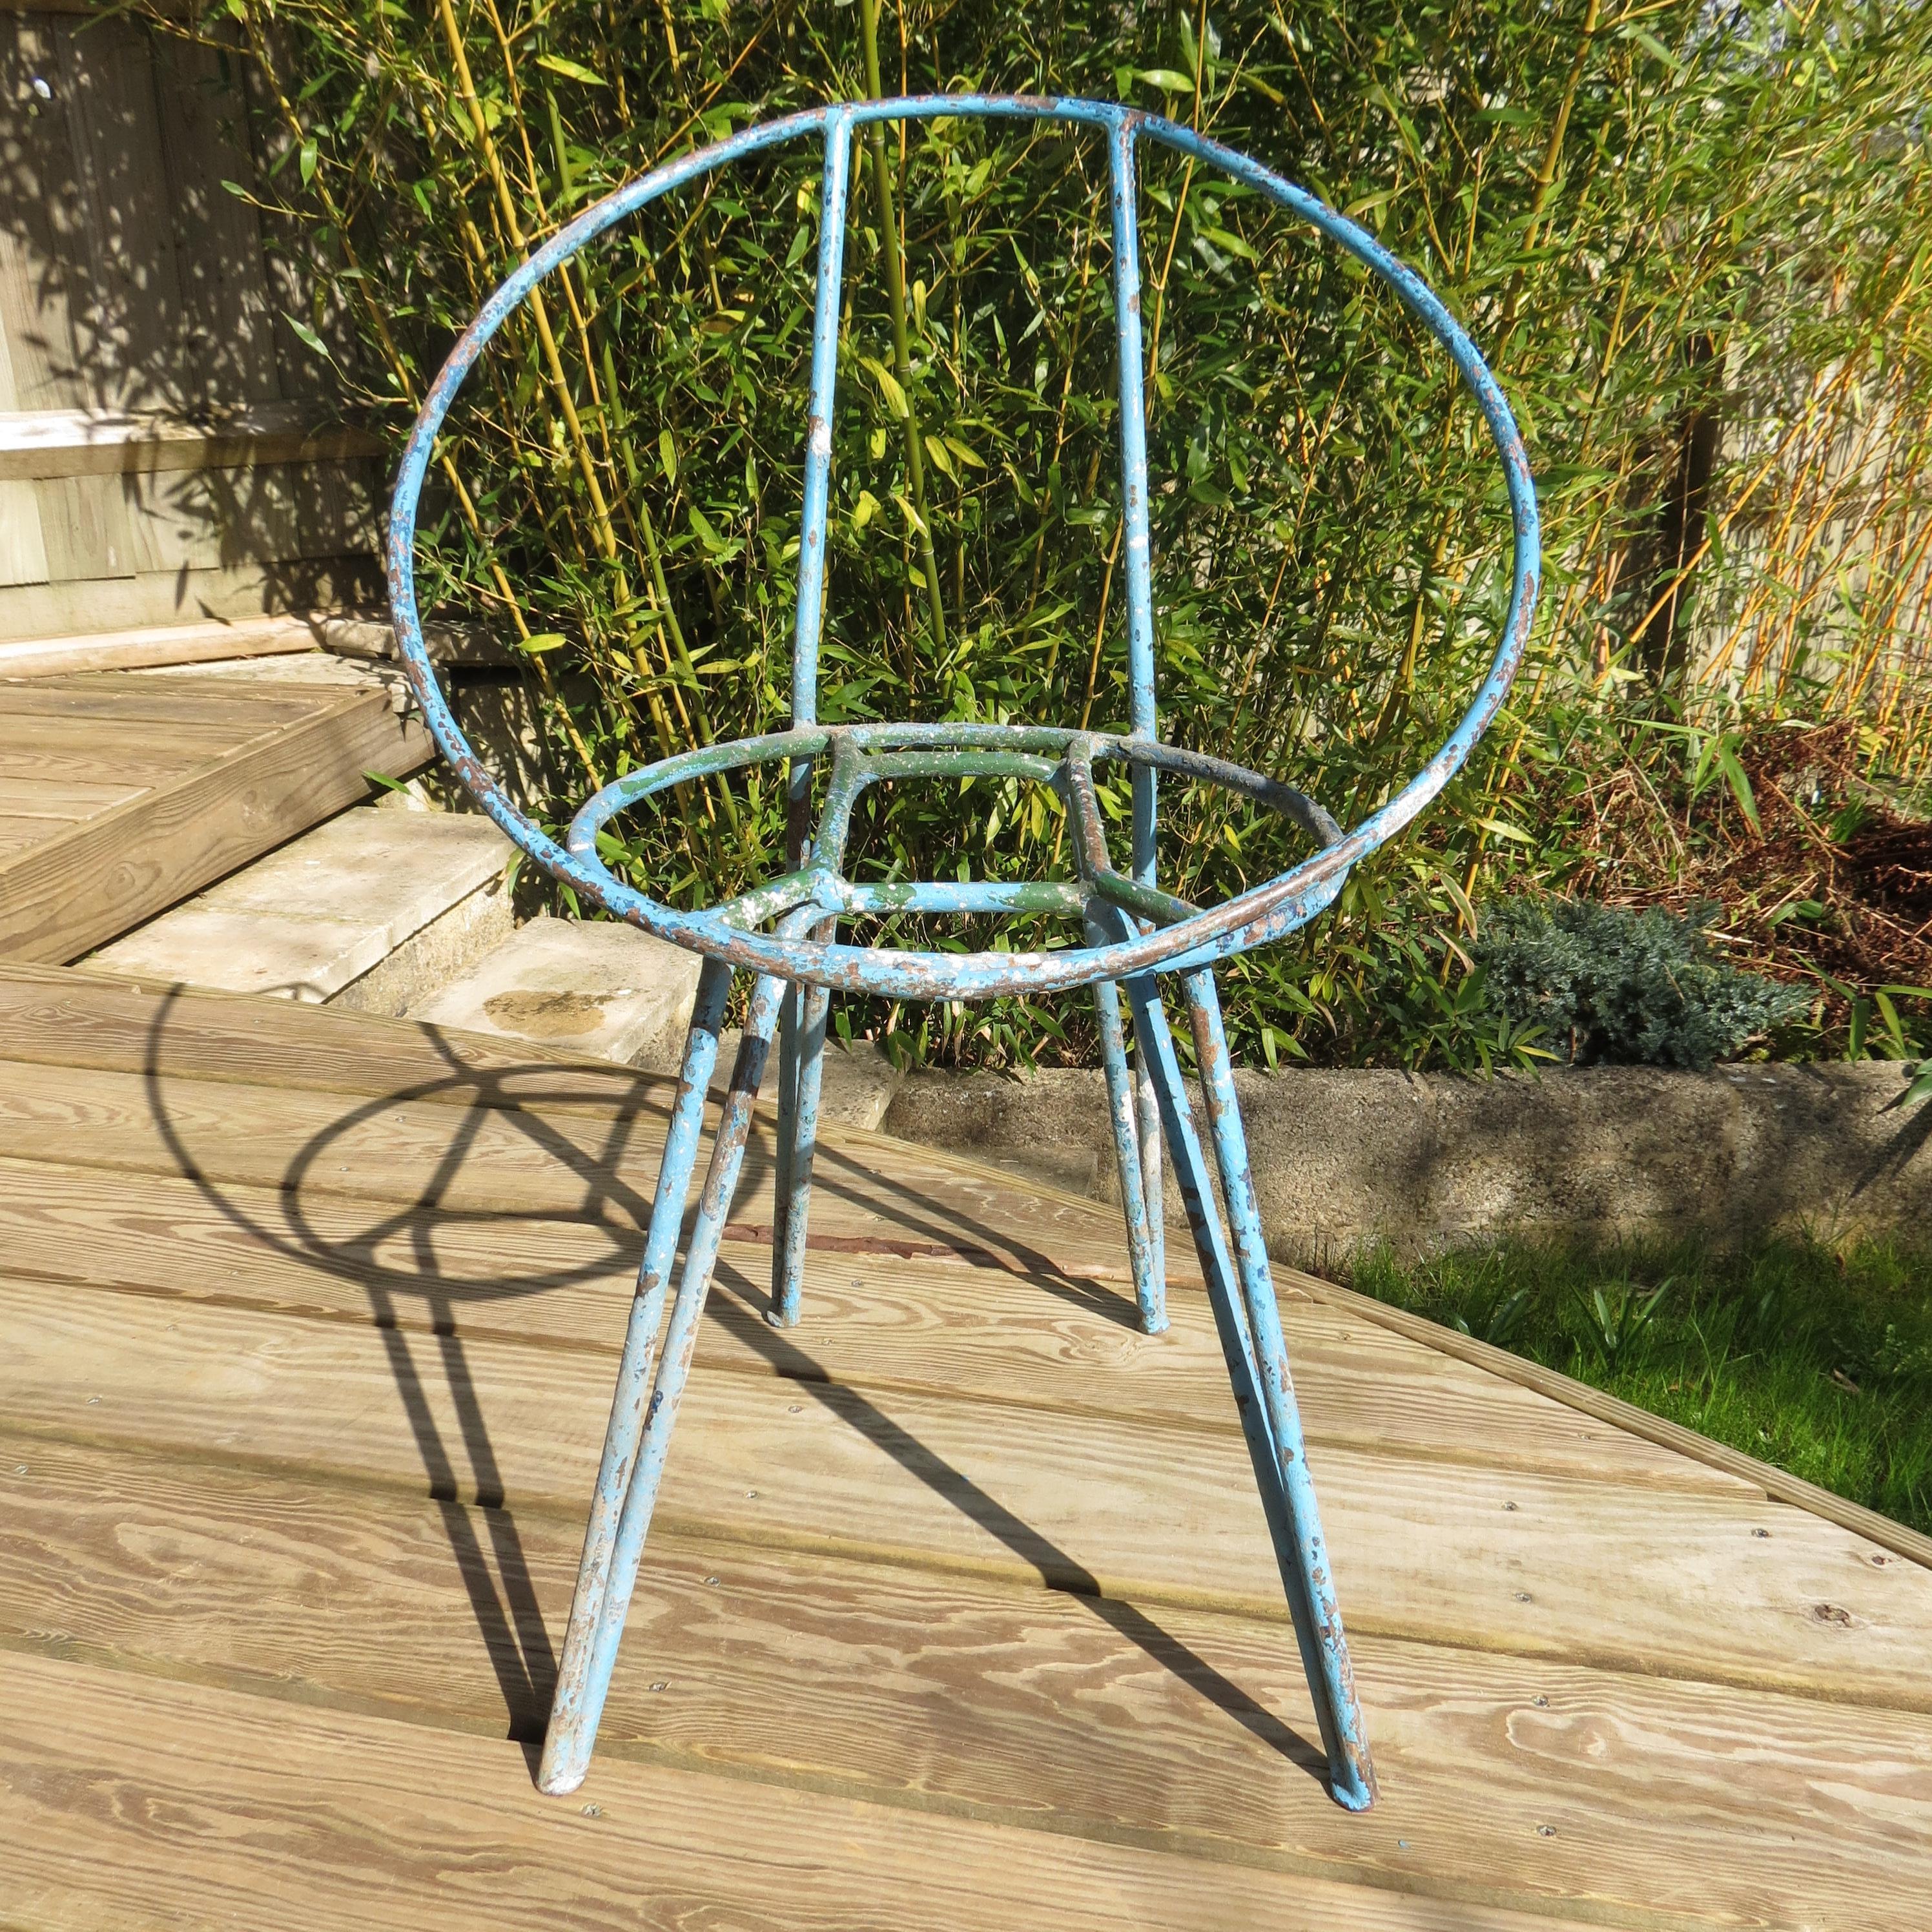 Set of 4 garden chairs made from steel rod, heavily painted, with various coats and colors over the years. Wonderfully patinated with loss of paint, revealing several layers of different colors of paint, this adds to their over all appeal.

These